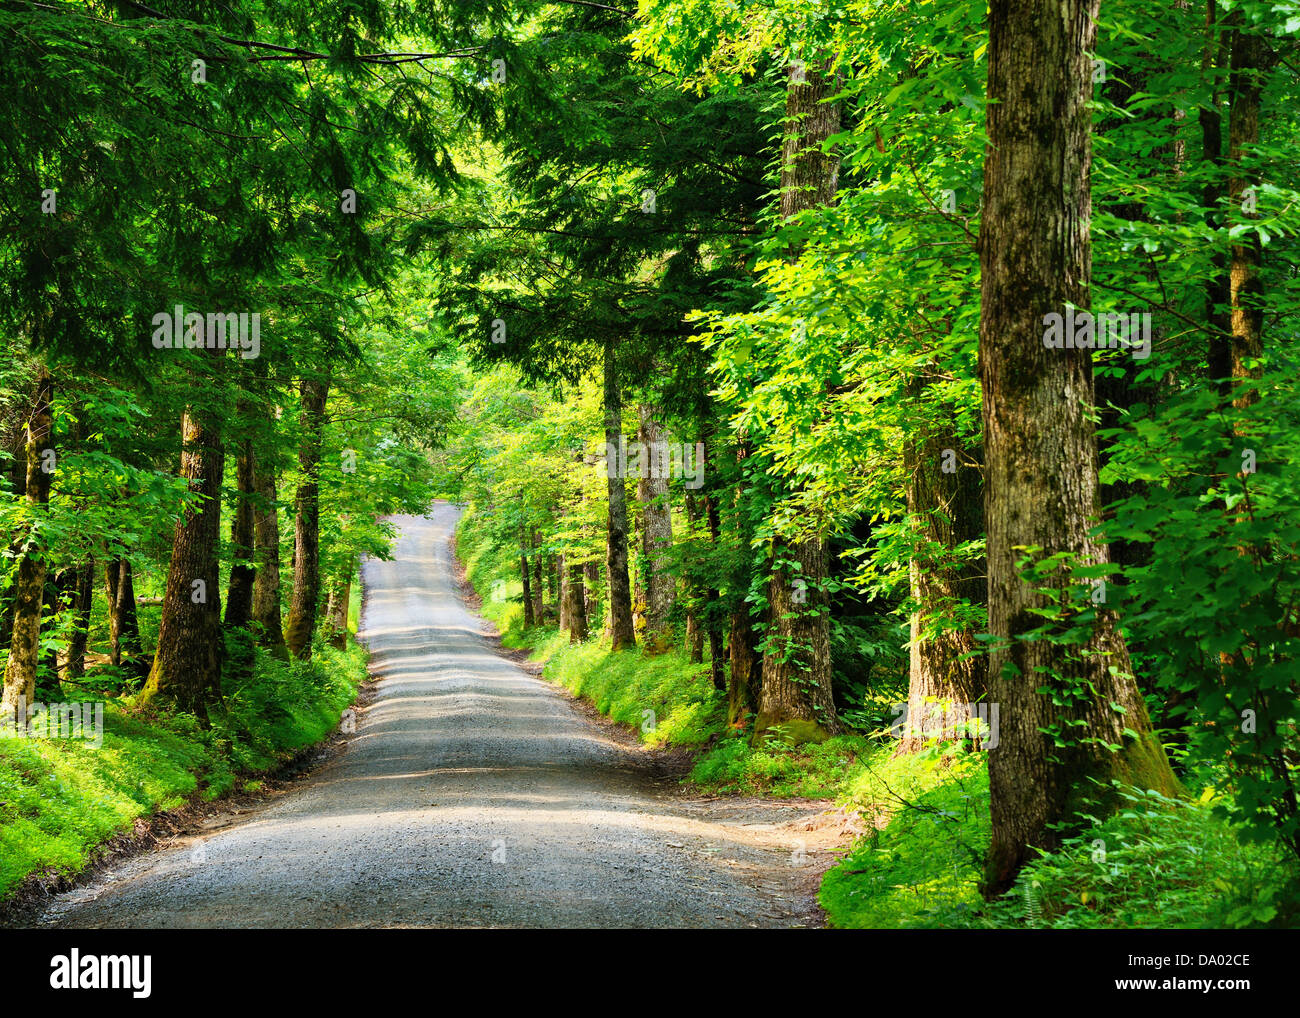 Old country lane at Sparks Lane in Cades Cove. Stock Photo